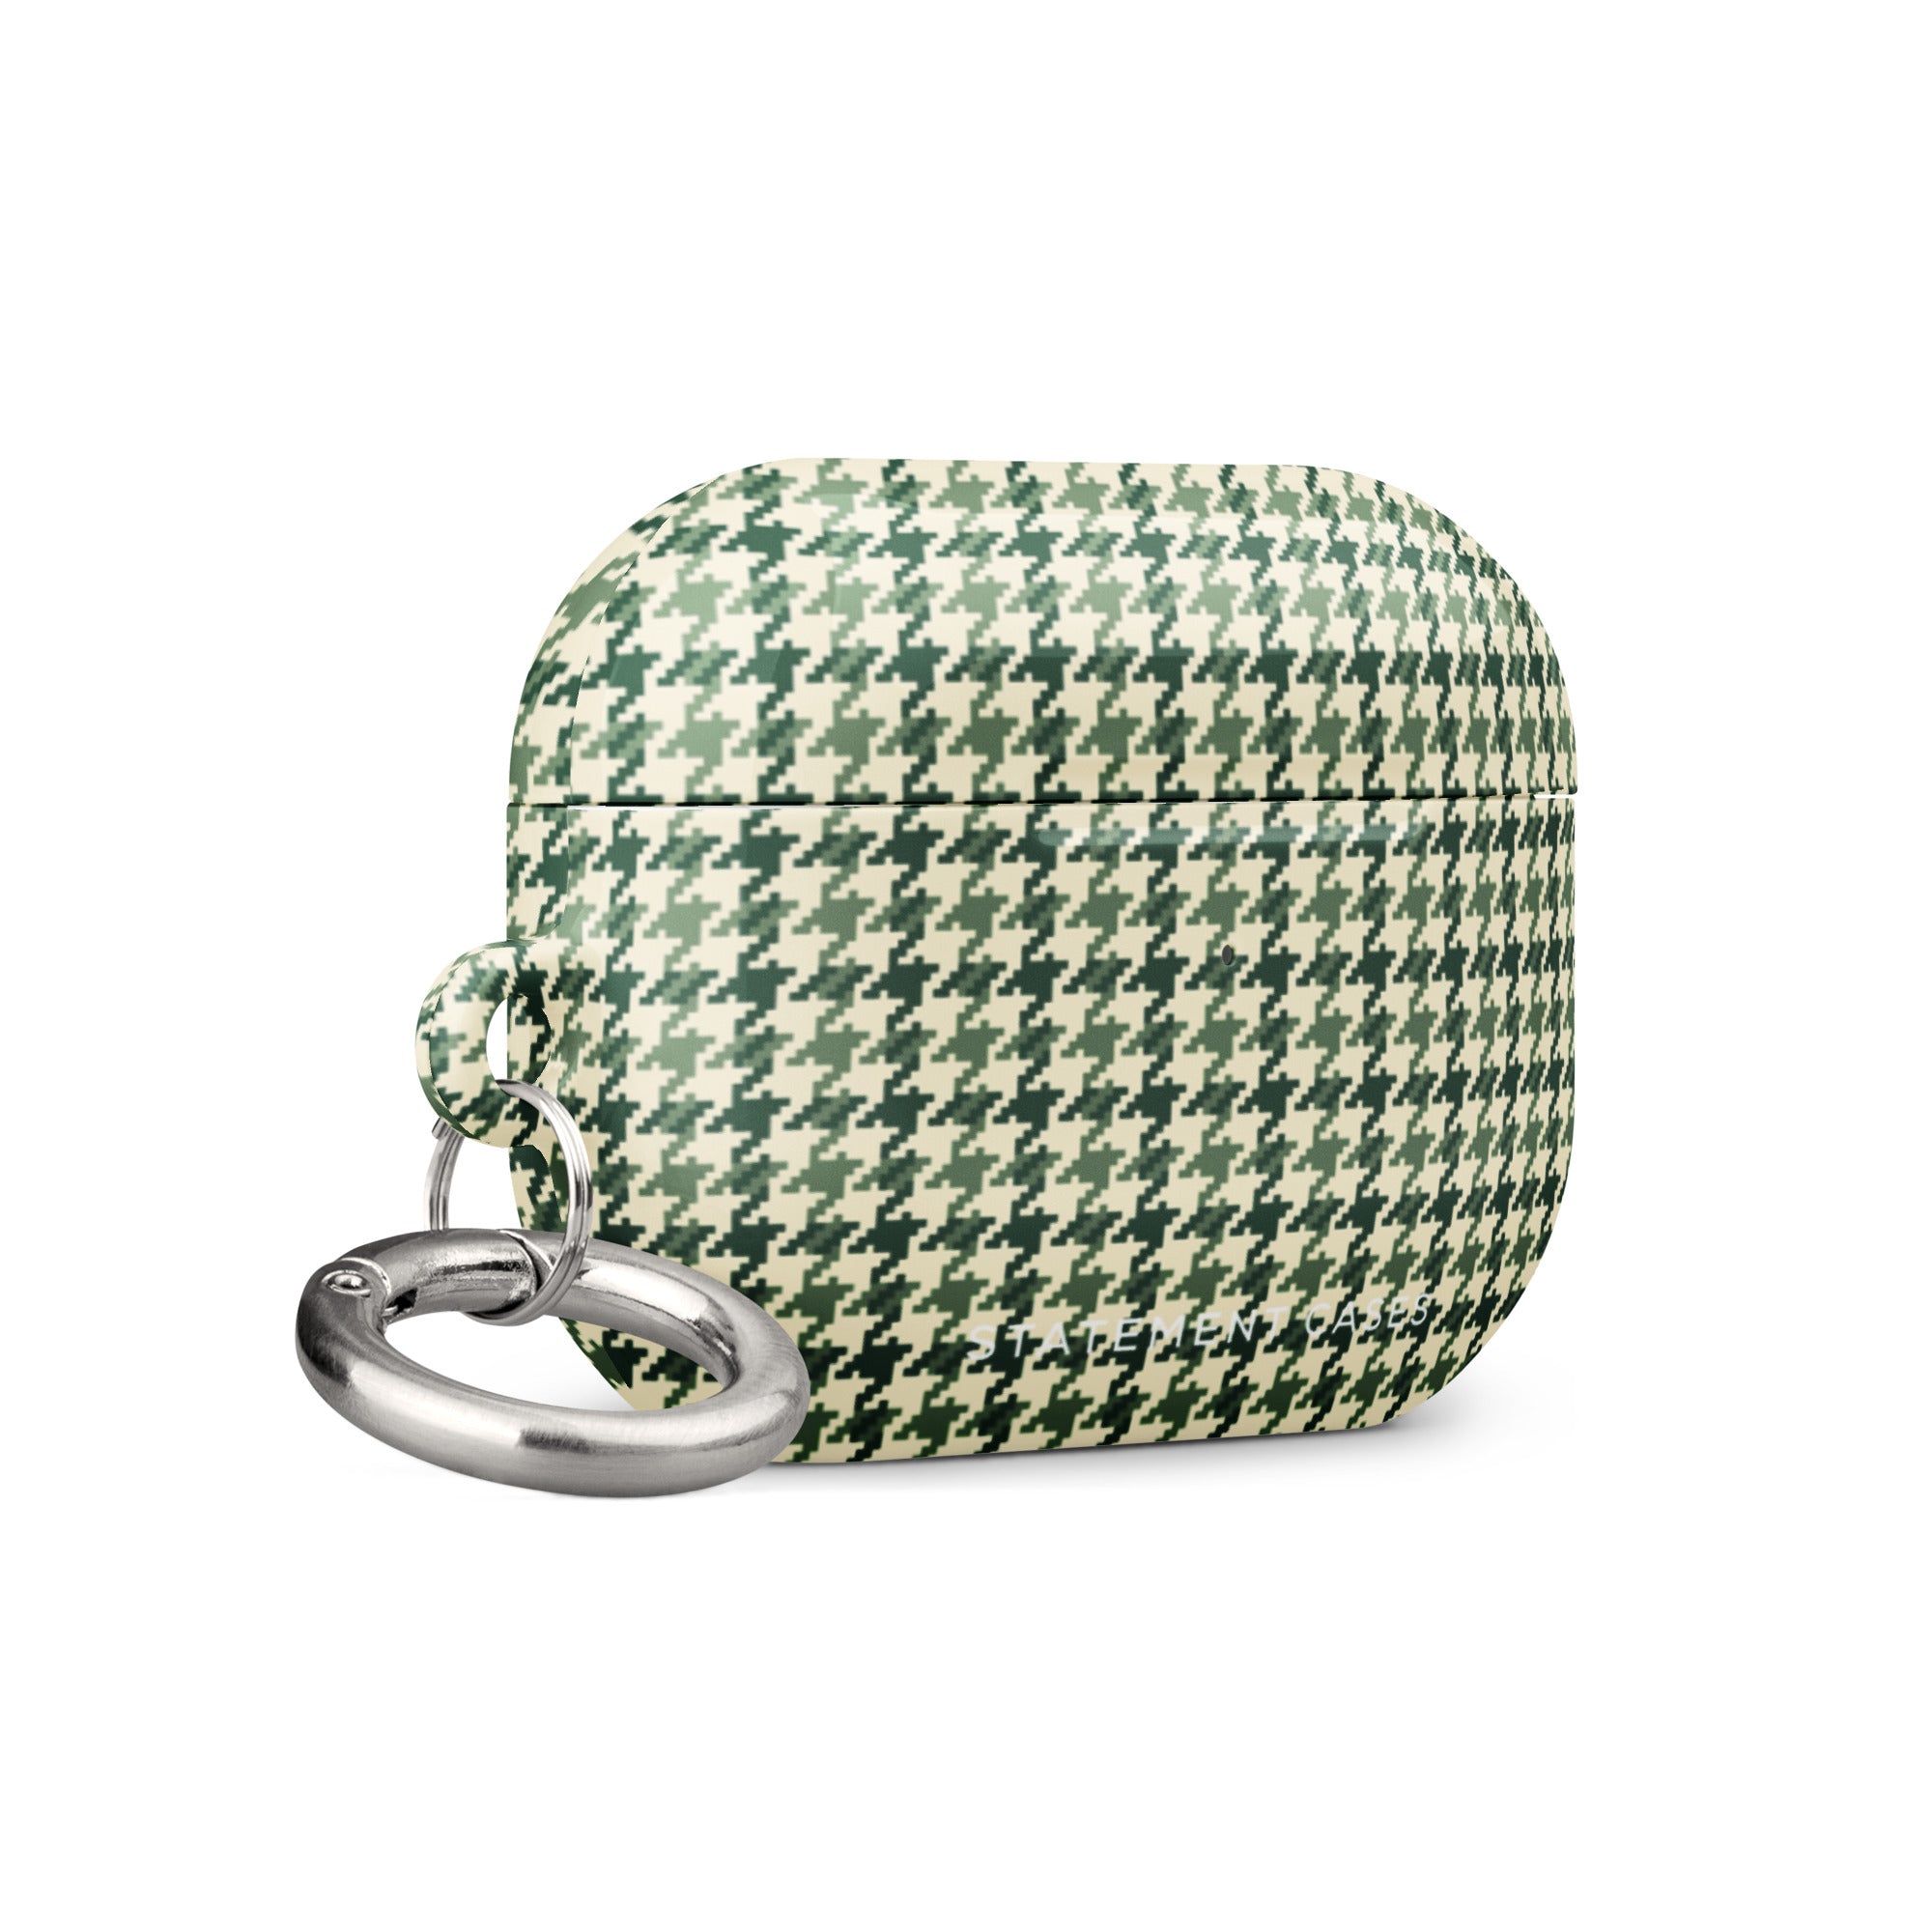 A green and white houndstooth-patterned Elegance Houndstooth for AirPods Pro Gen 2 by Statement Cases with a metal carabiner attachment. The case likely holds earbuds or earphones. The background is plain white.